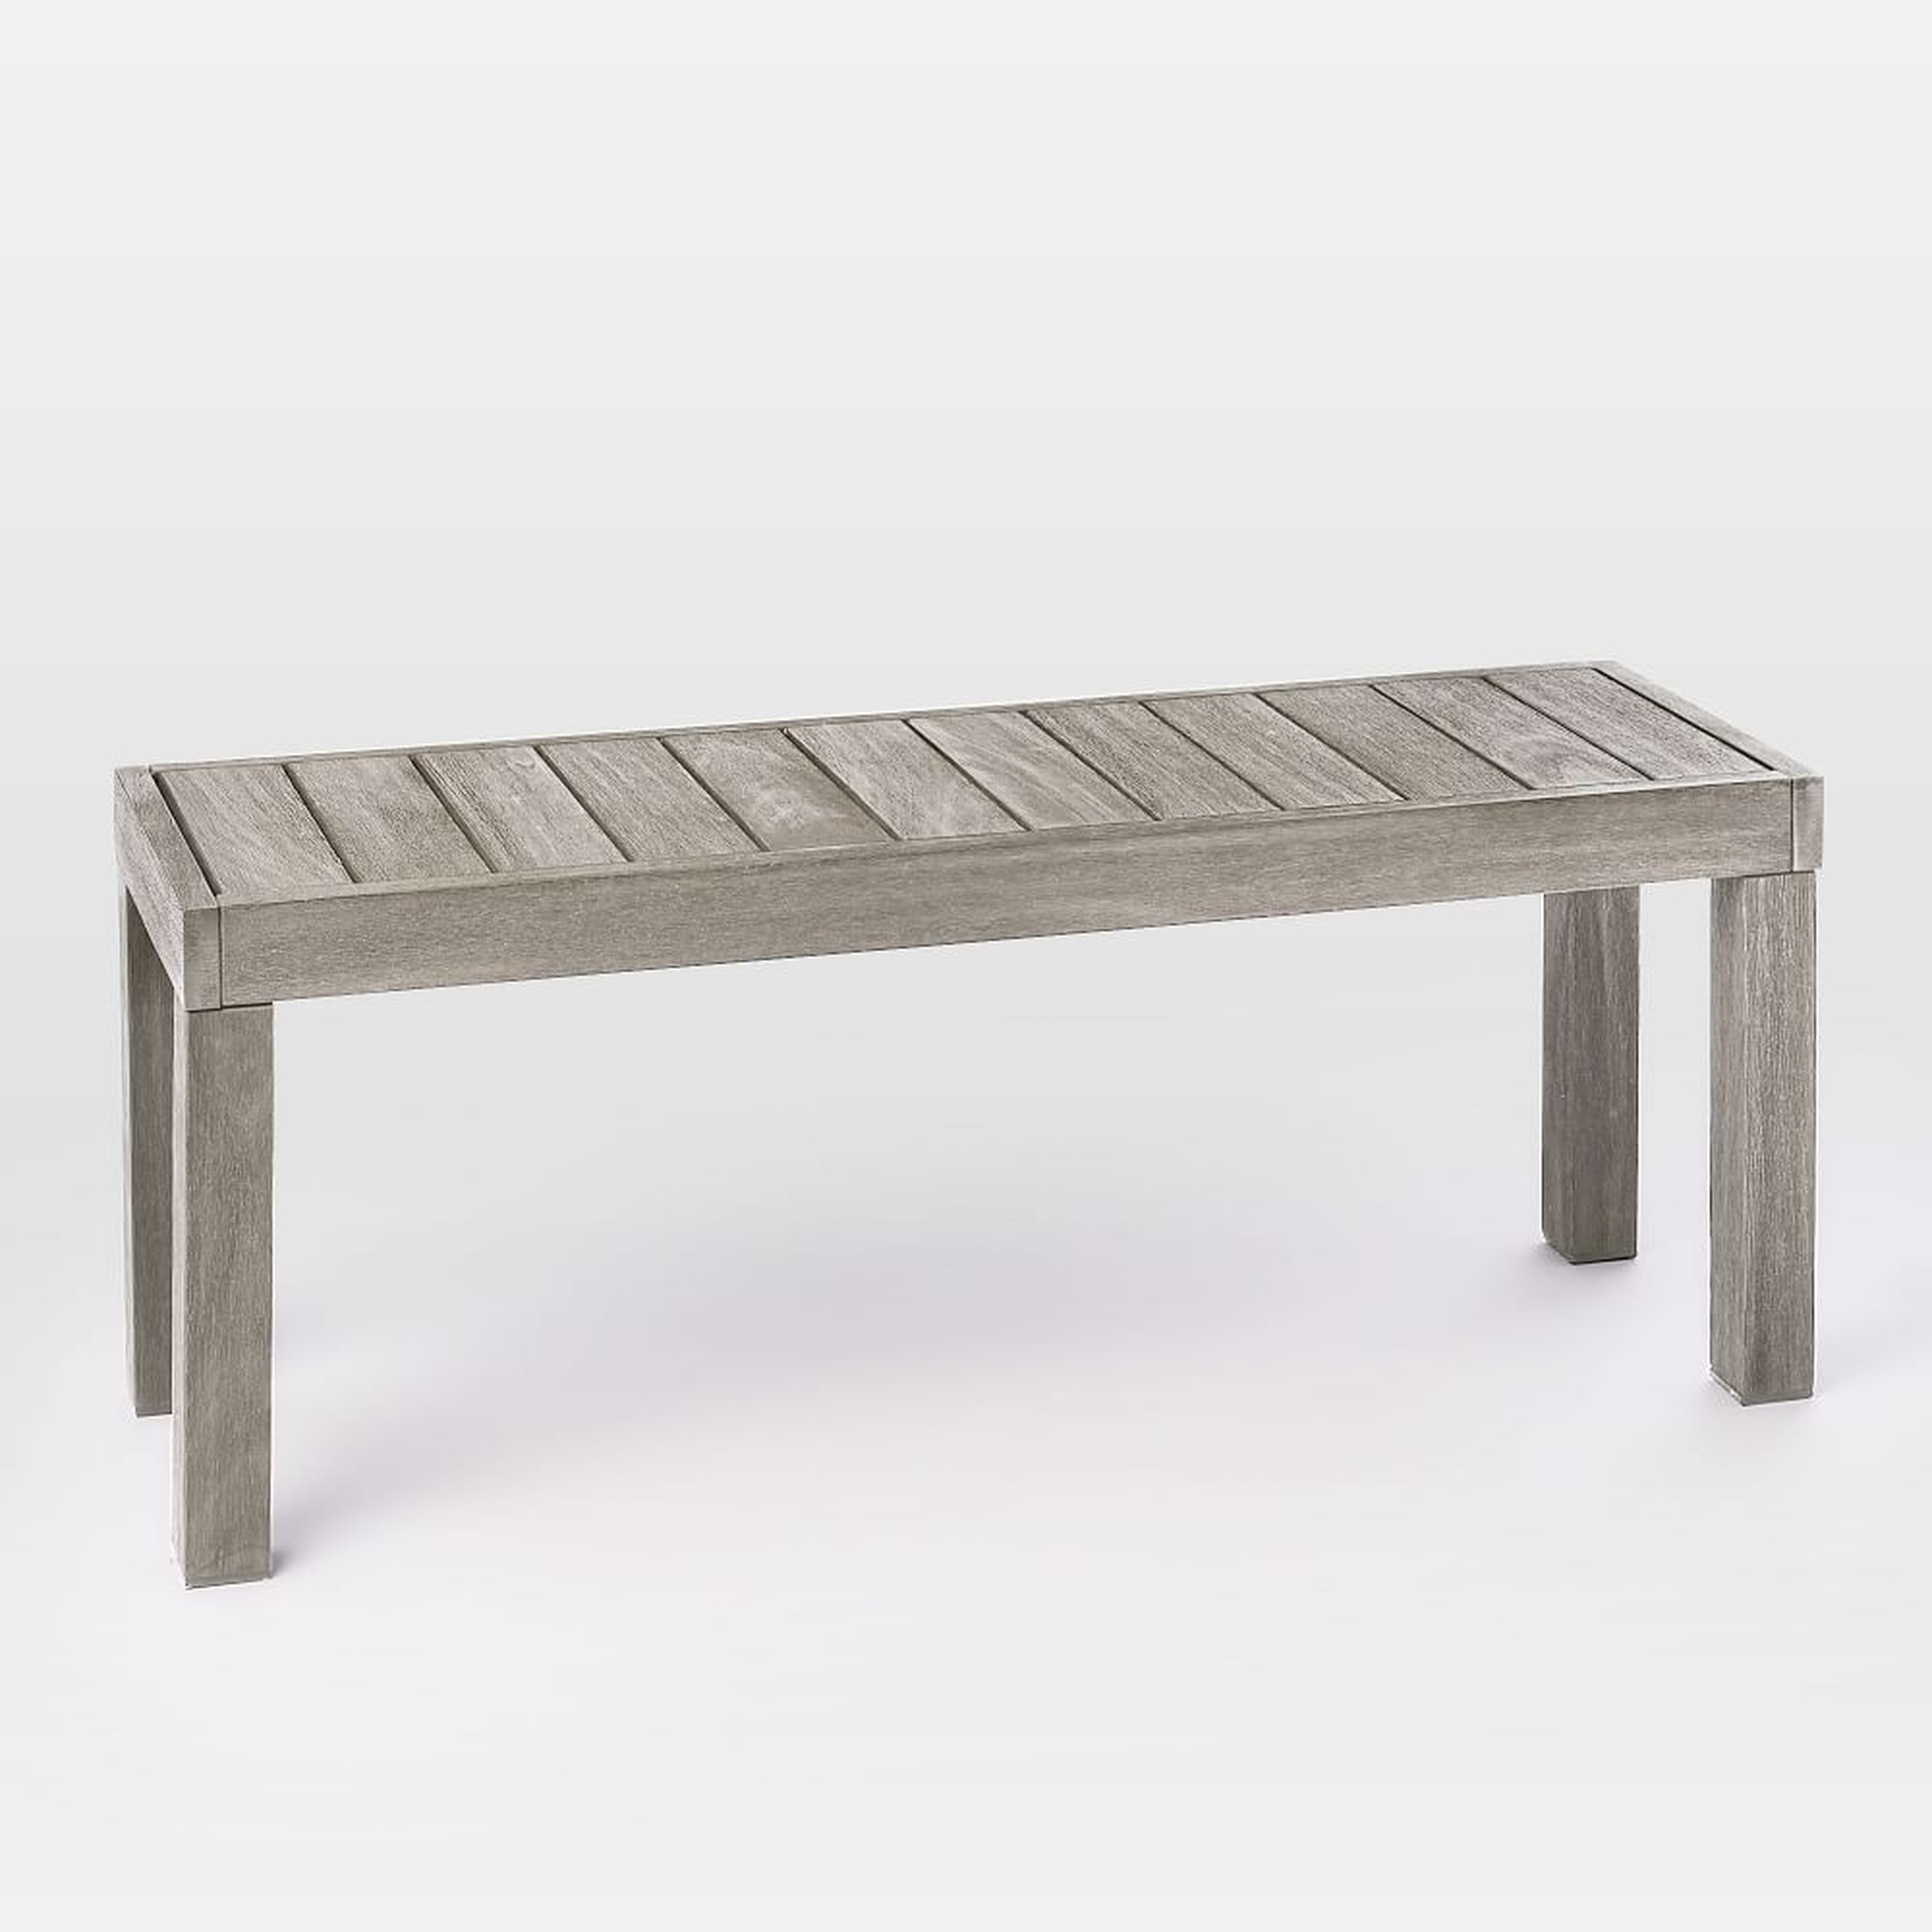 Portside Outdoor Dining Bench, 47", Weathered Gray - West Elm